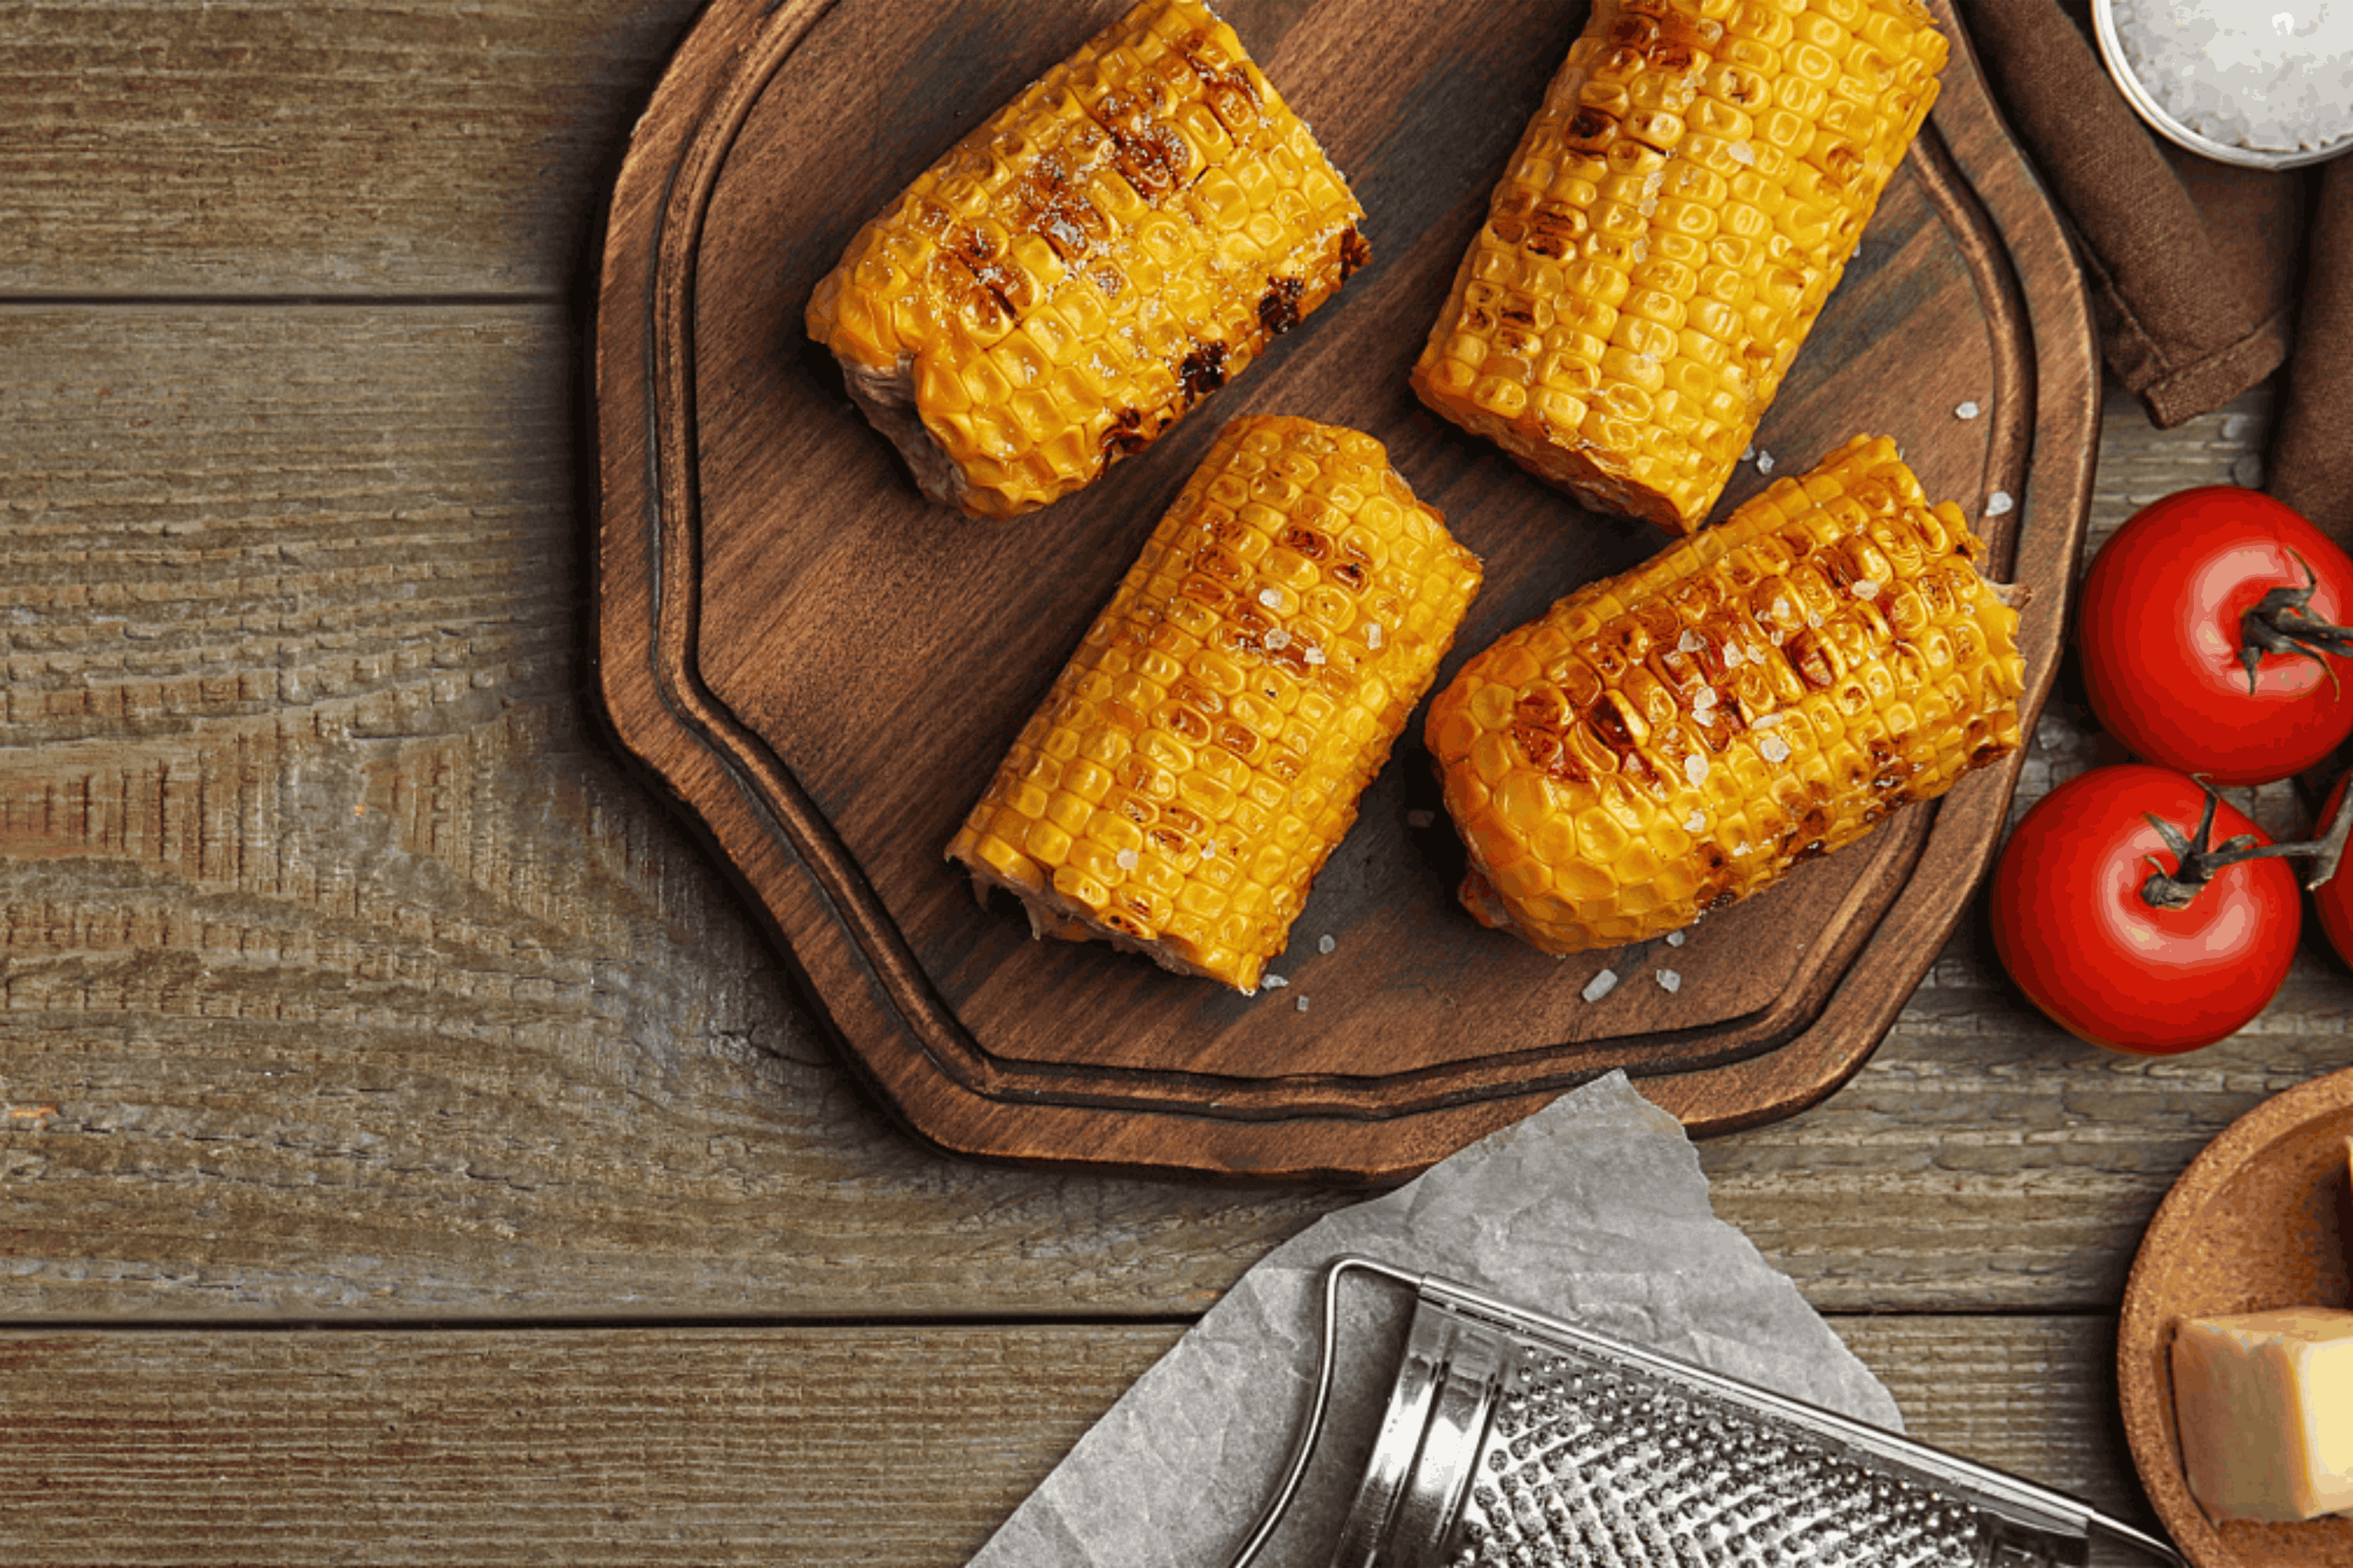 Grilling corn on the cob on your X&E smokeless grill is a simple and delicious way to enjoy this classic summer vegetable.